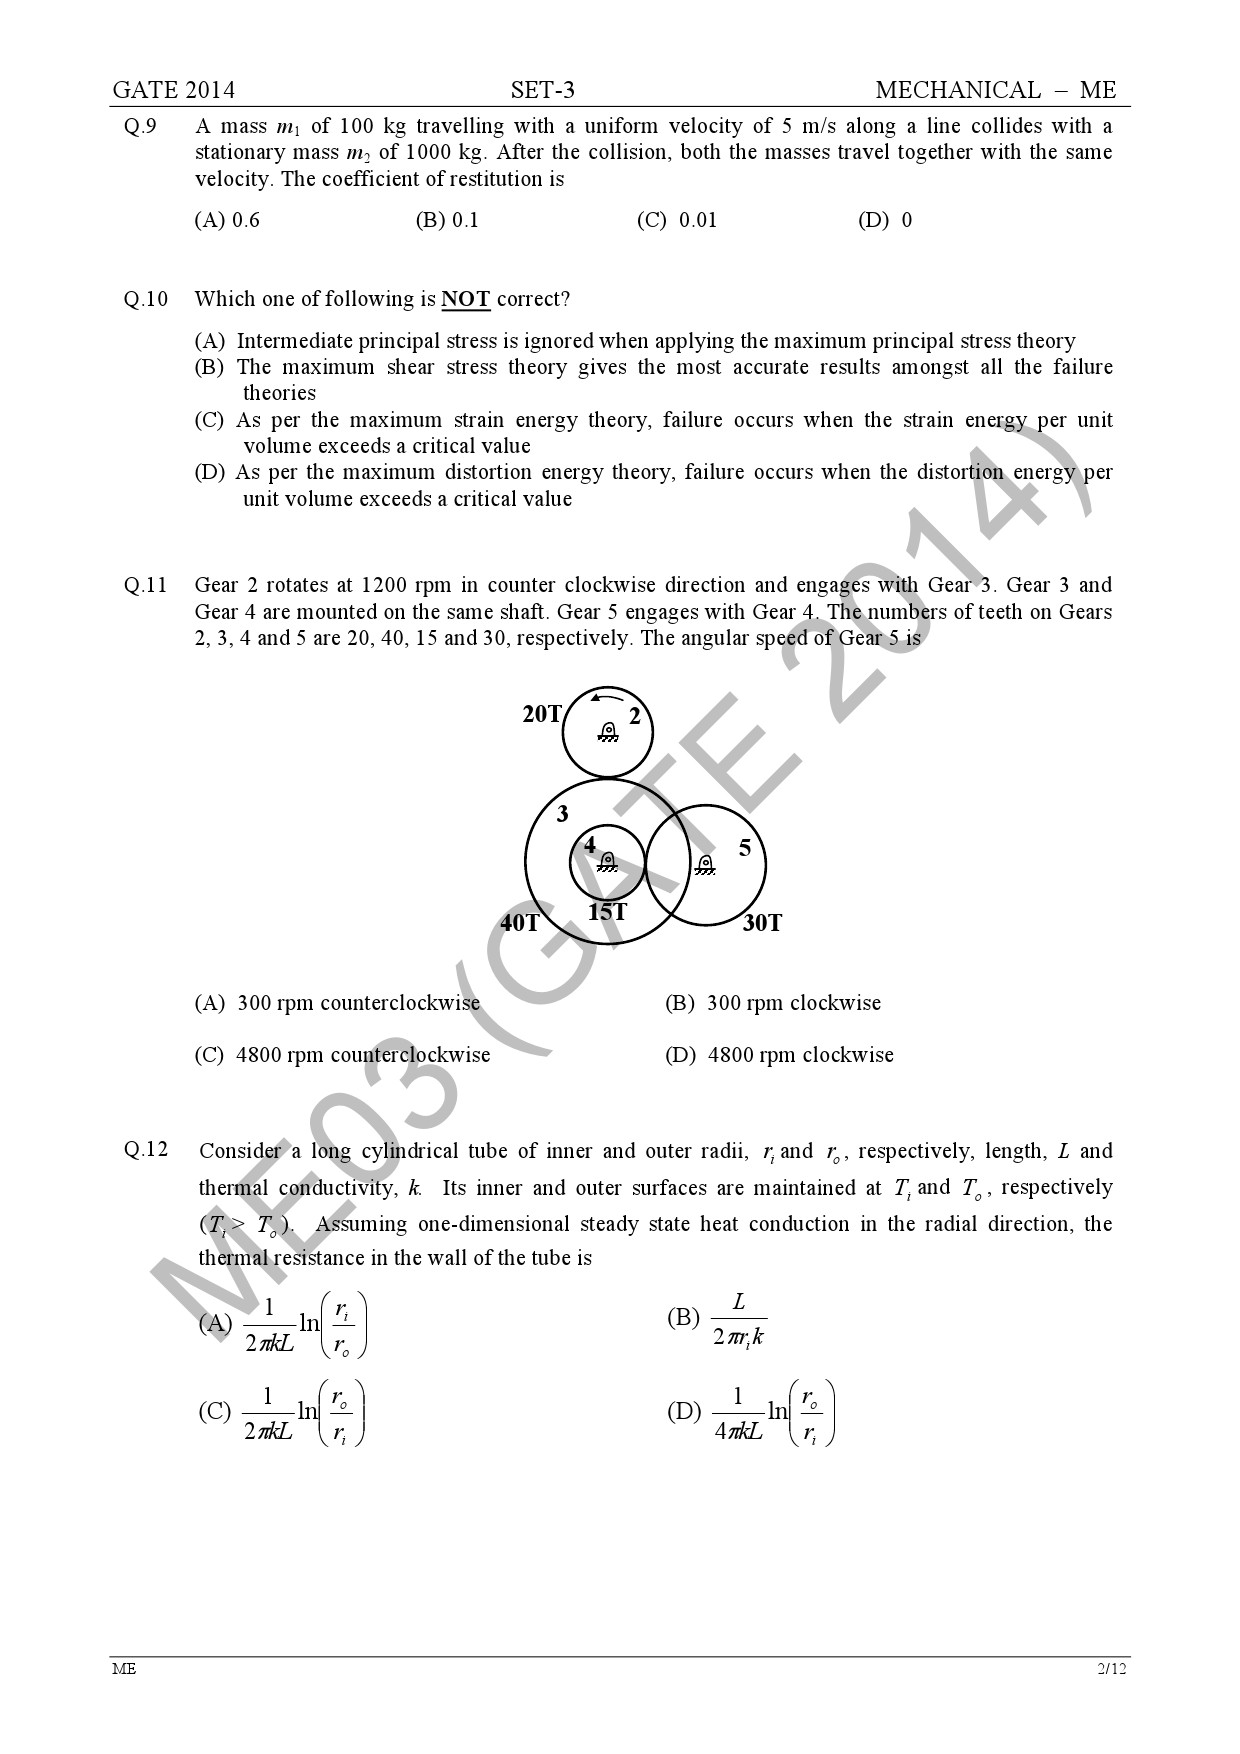 GATE Exam Question Paper 2014 Mechanical Engineering Set 3 9